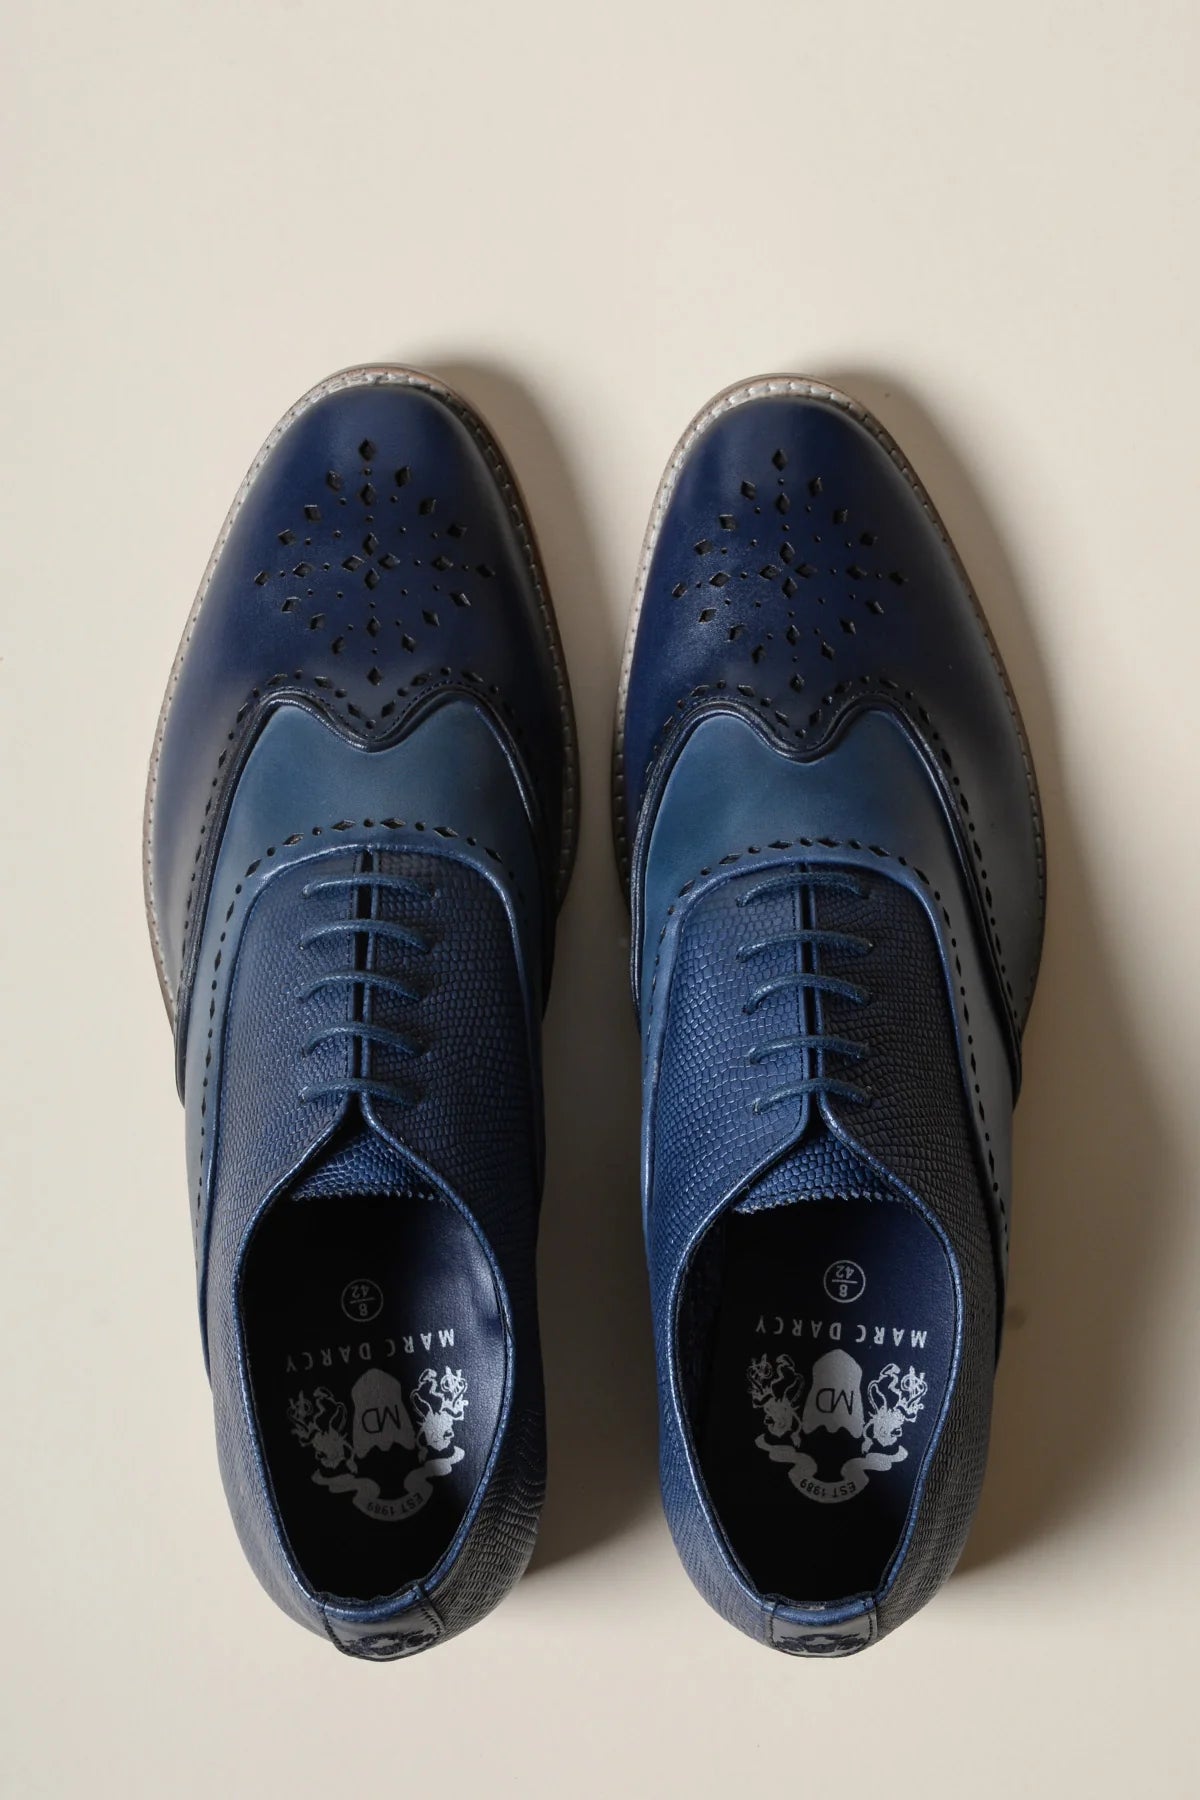 Navy leather shoes, Marc Darcy Ryan - Wingtip brogue